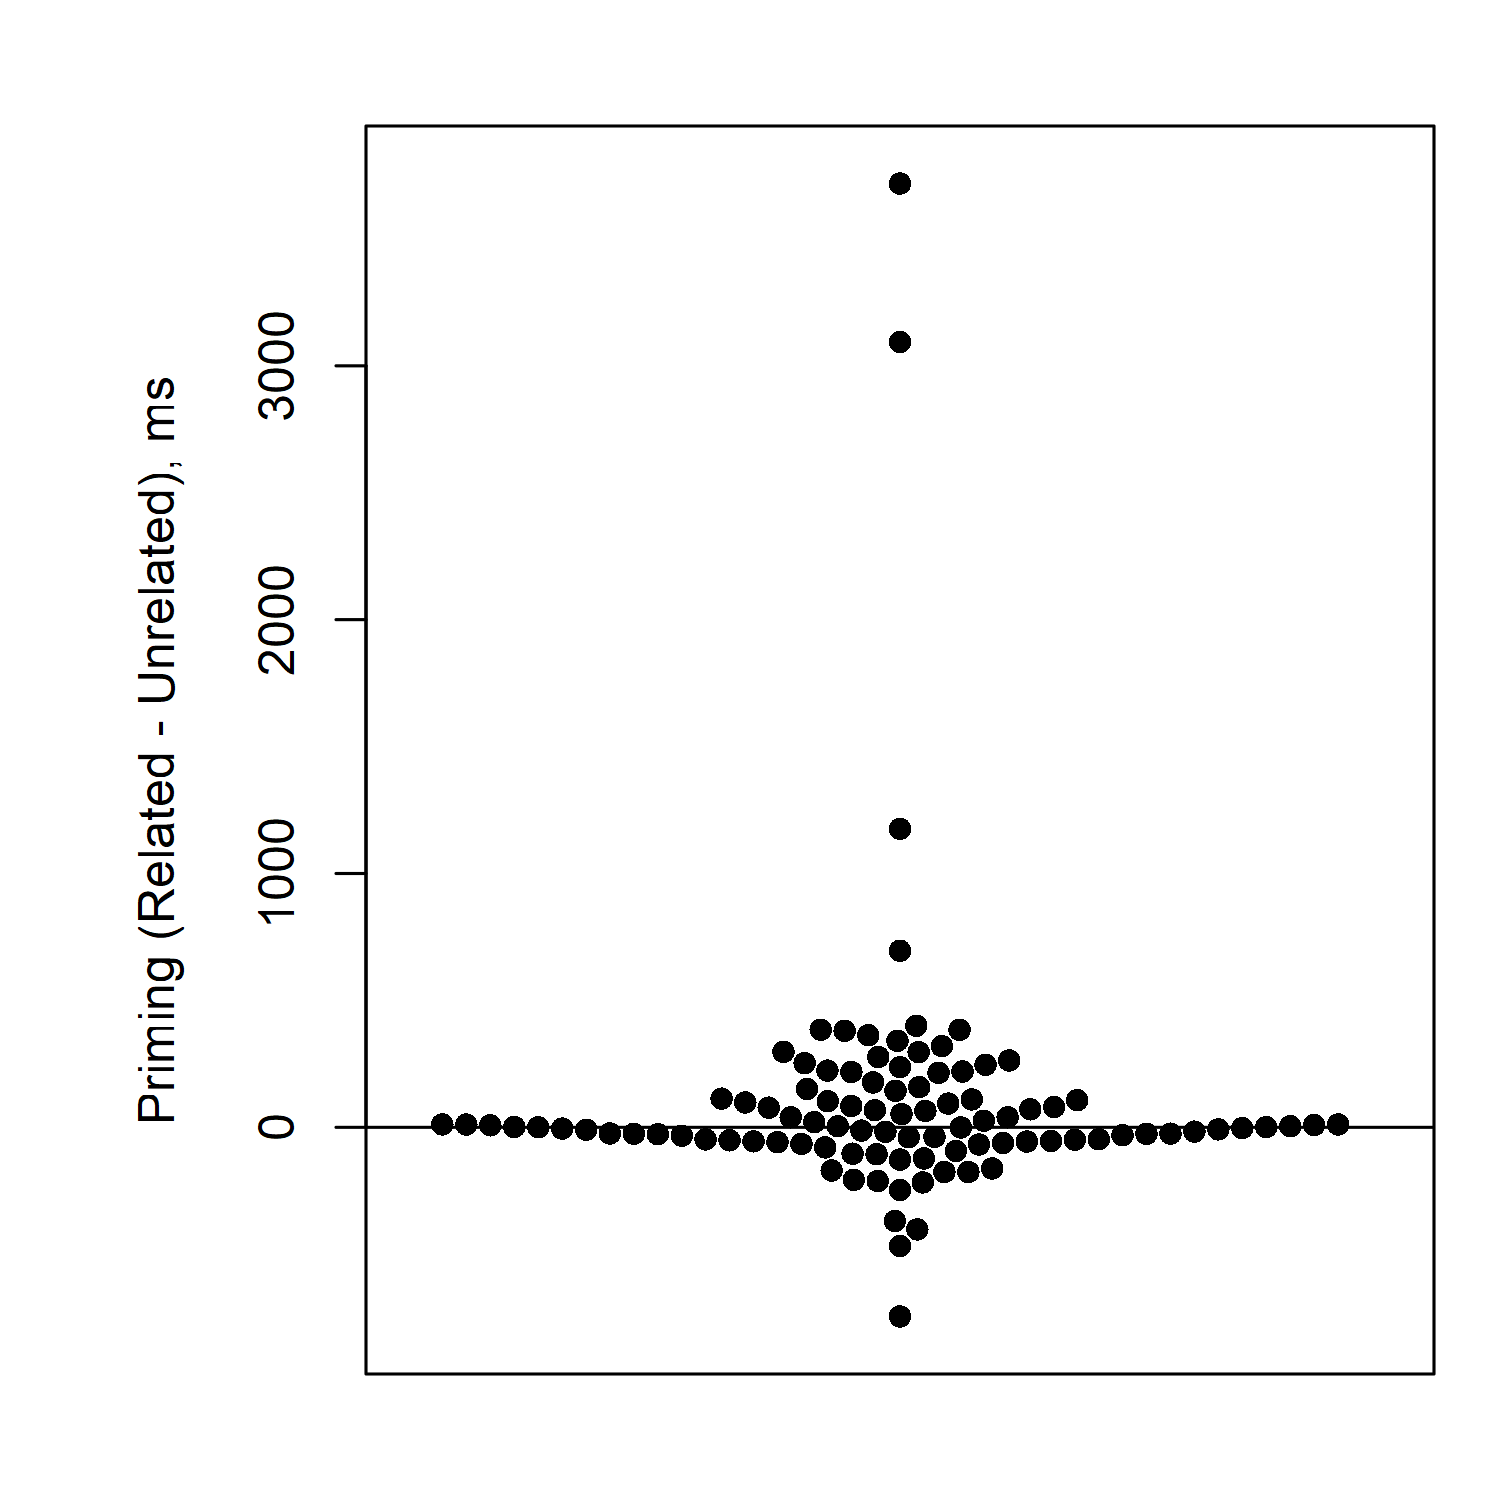 Beeswarm plot of priming effects. Almost all participants are near zero, but several participants are below zero and several are very far above zero.